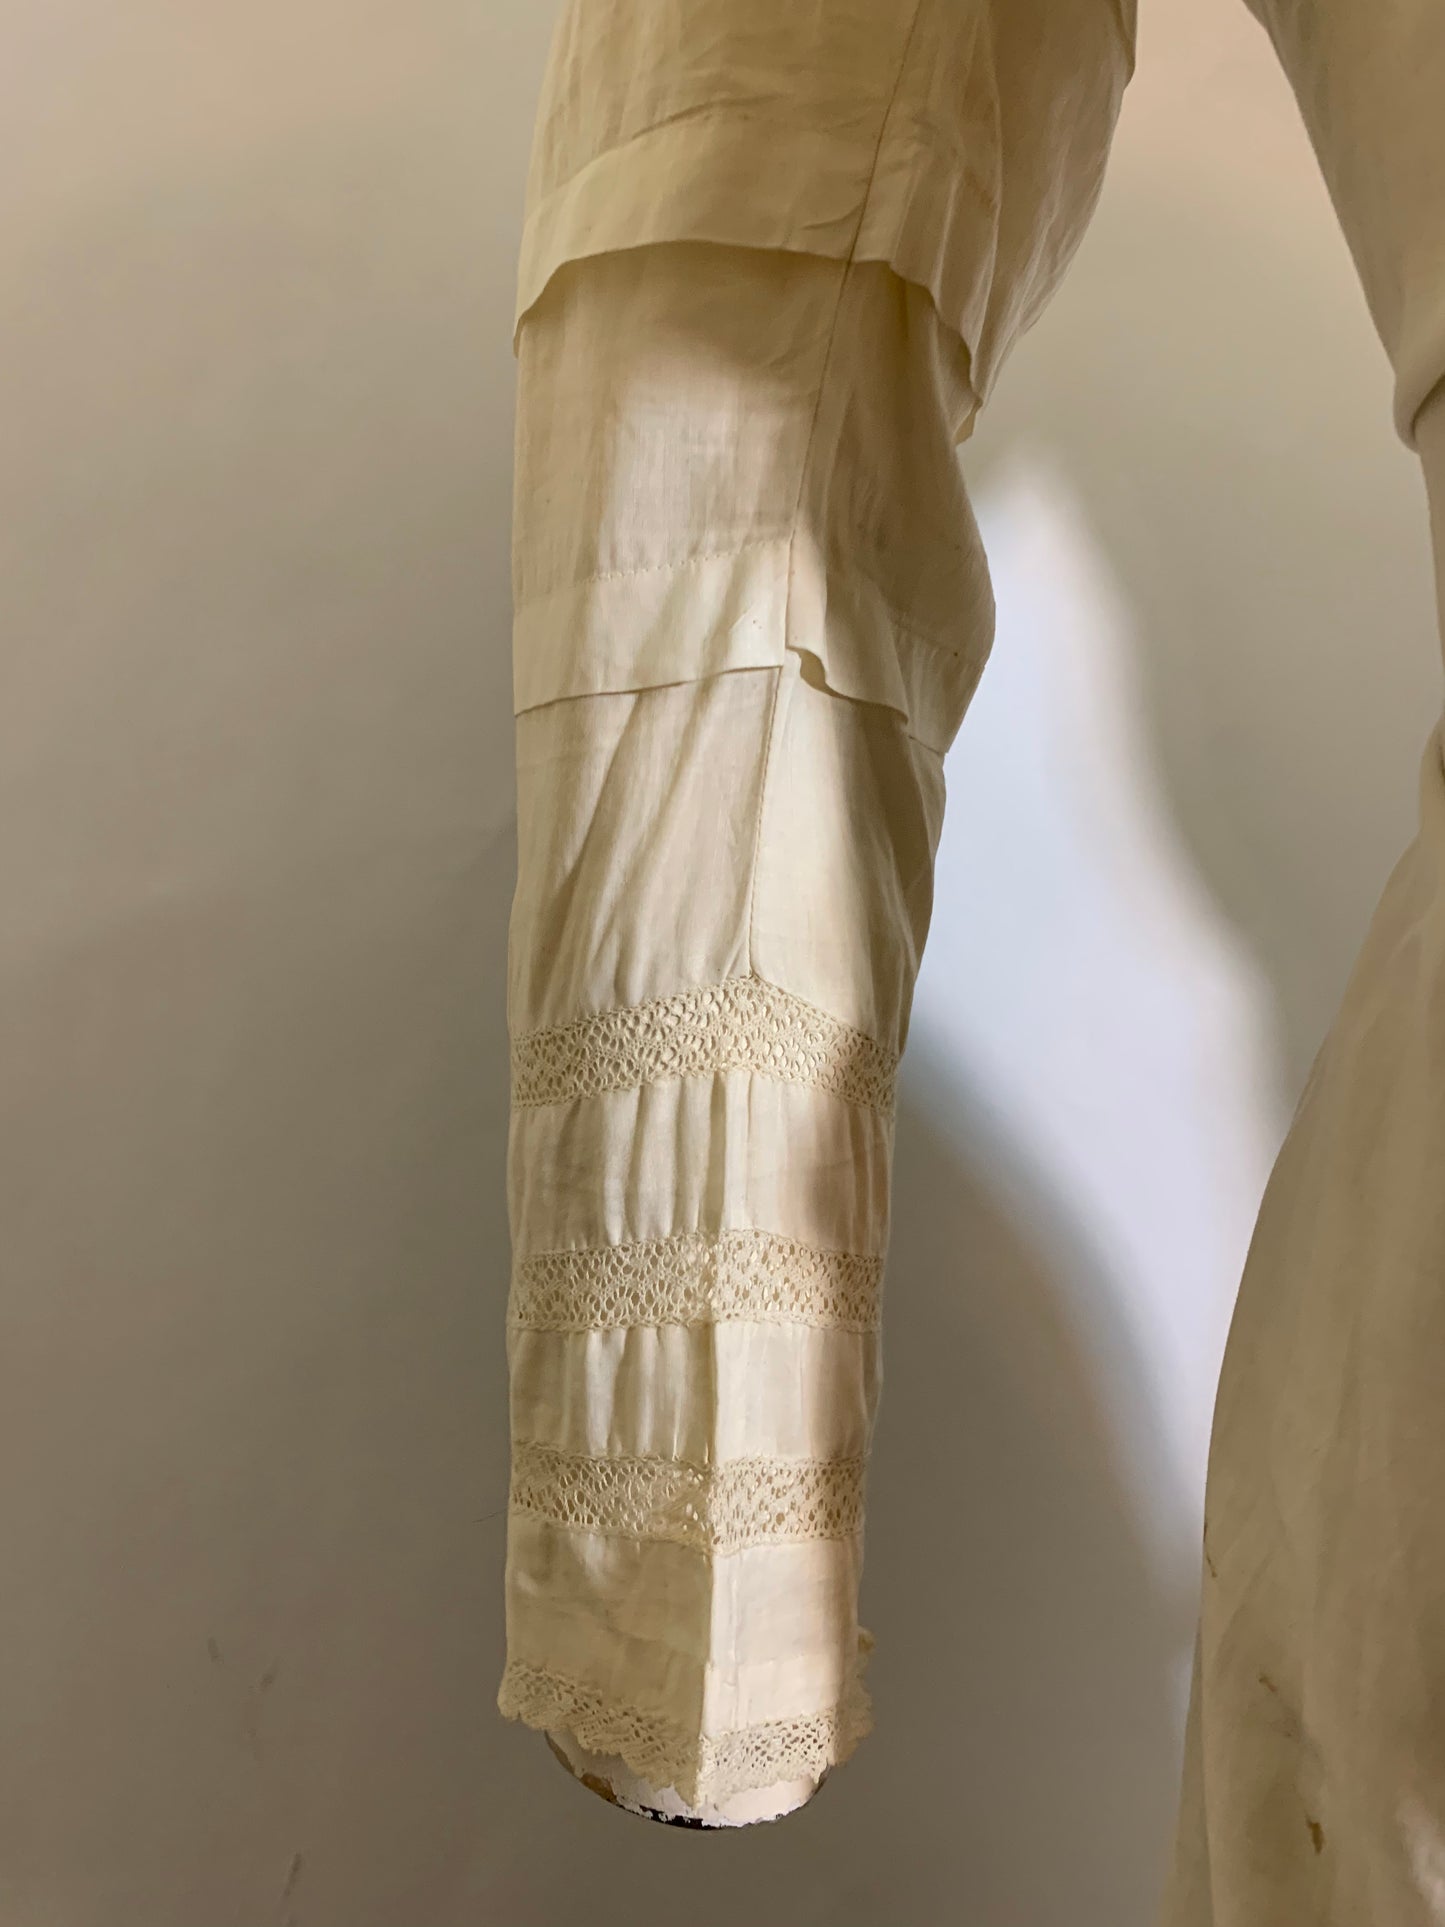 Summer Party Dress in White Lawn Cotton with Embroidery and Lace circa 1910s